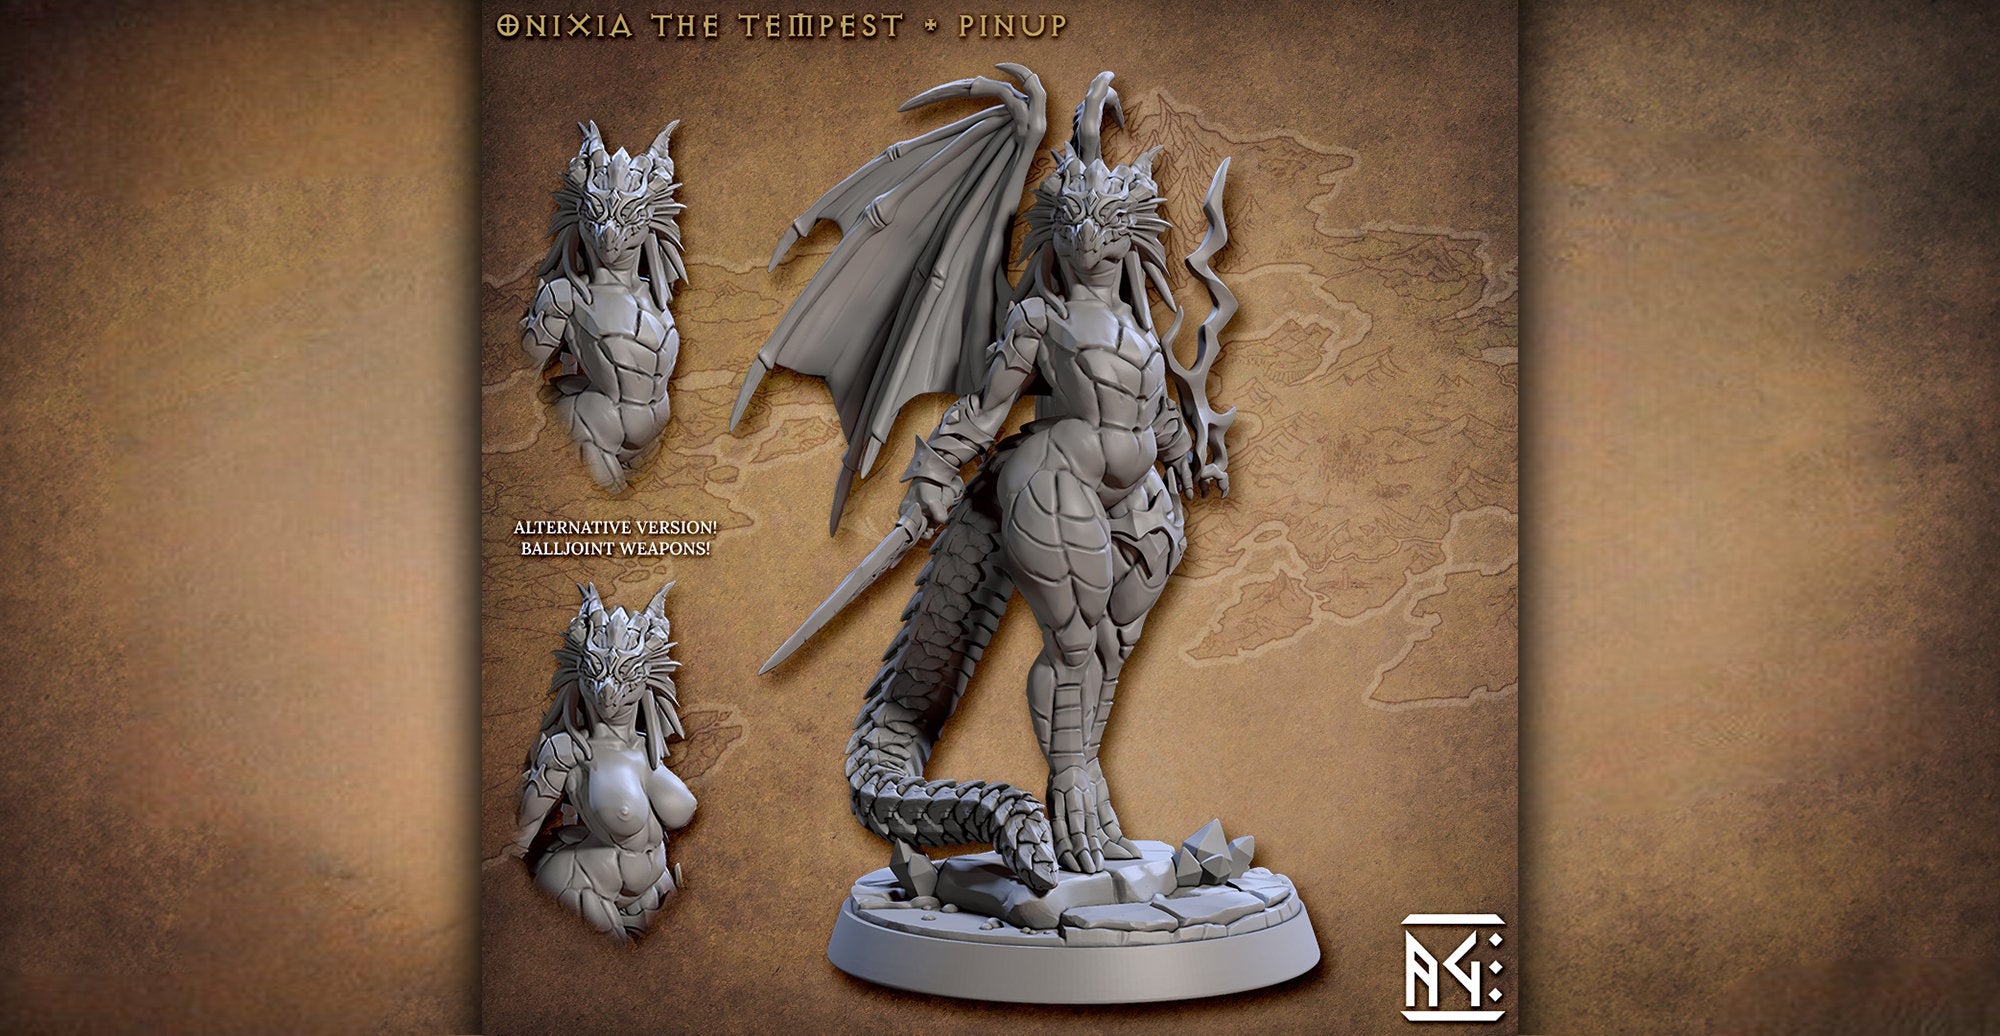 Sexy Draconian Dragonborn "Onixia - Pinup Girl" | 8K 3D Print | Dungeons and Dragons | DnD | Pathfinder | Tabletop | Hero Size | 28-32 mm-Role Playing Miniatures